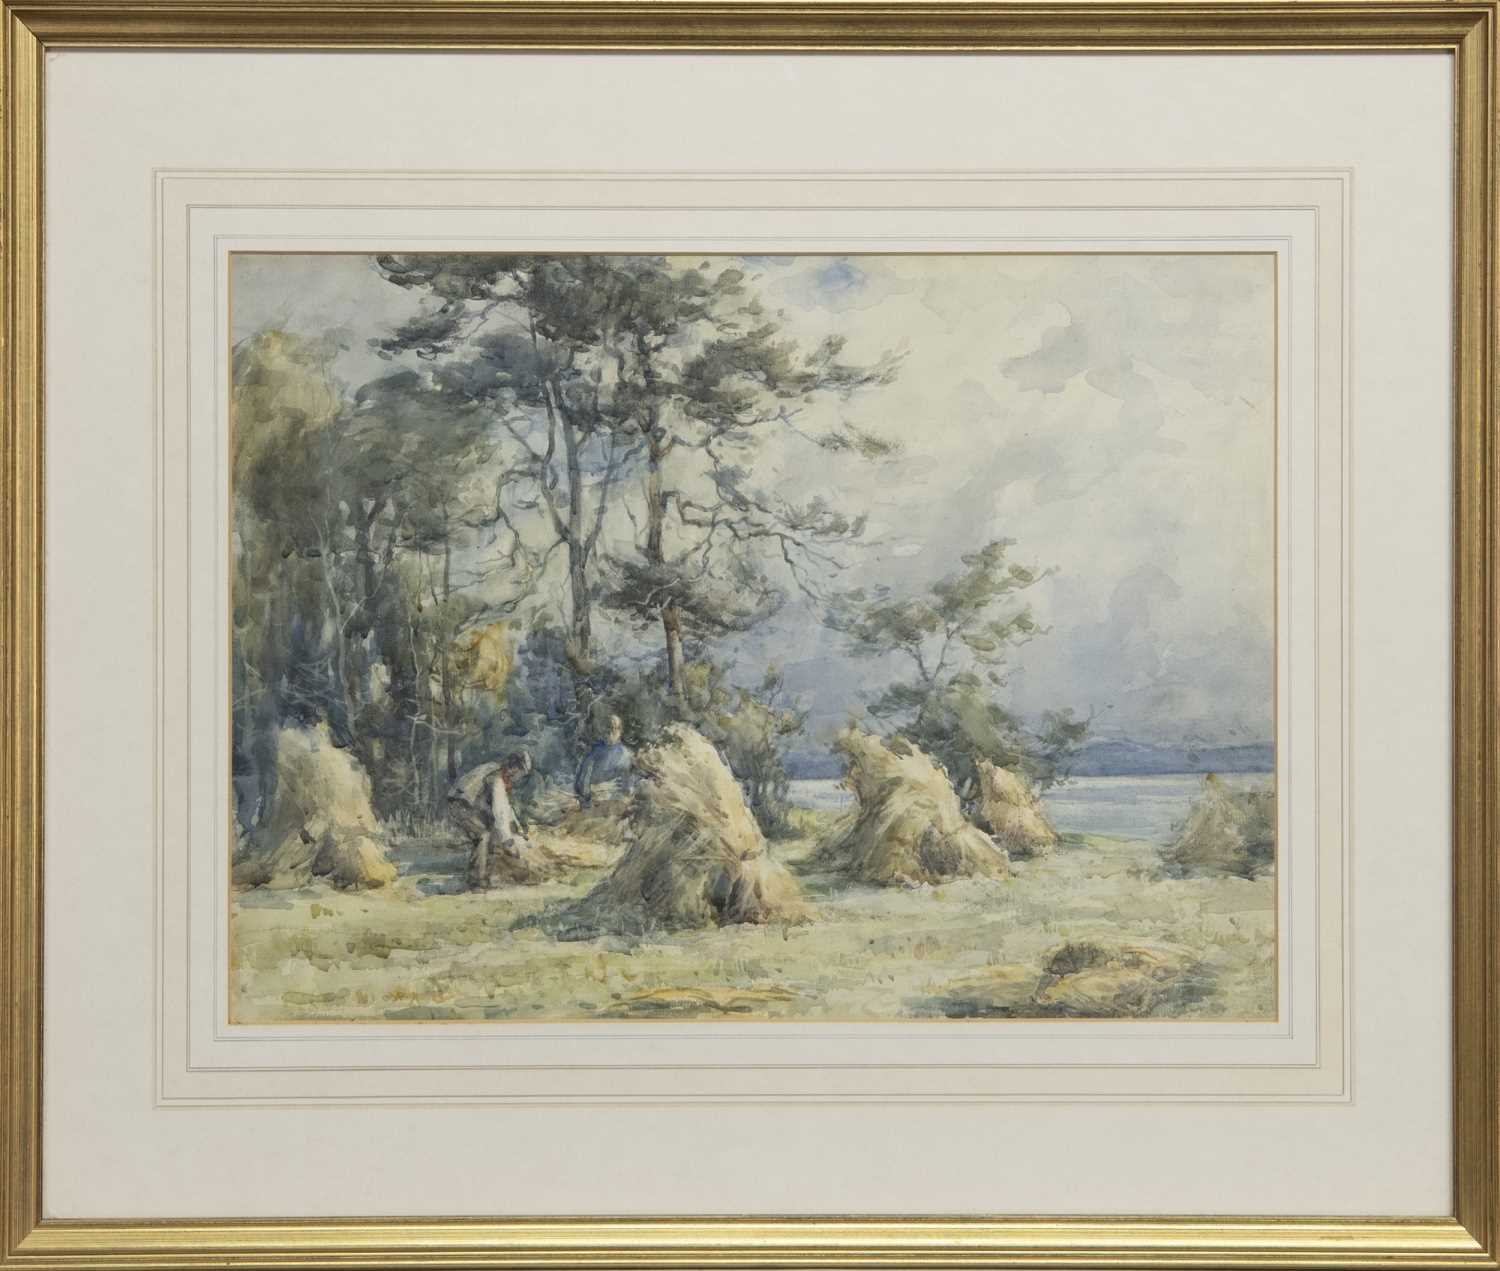 Lot 315 - THE HARVESTERS, A WATERCOLOUR BY JOHN MACLAUCHLAN MILNE